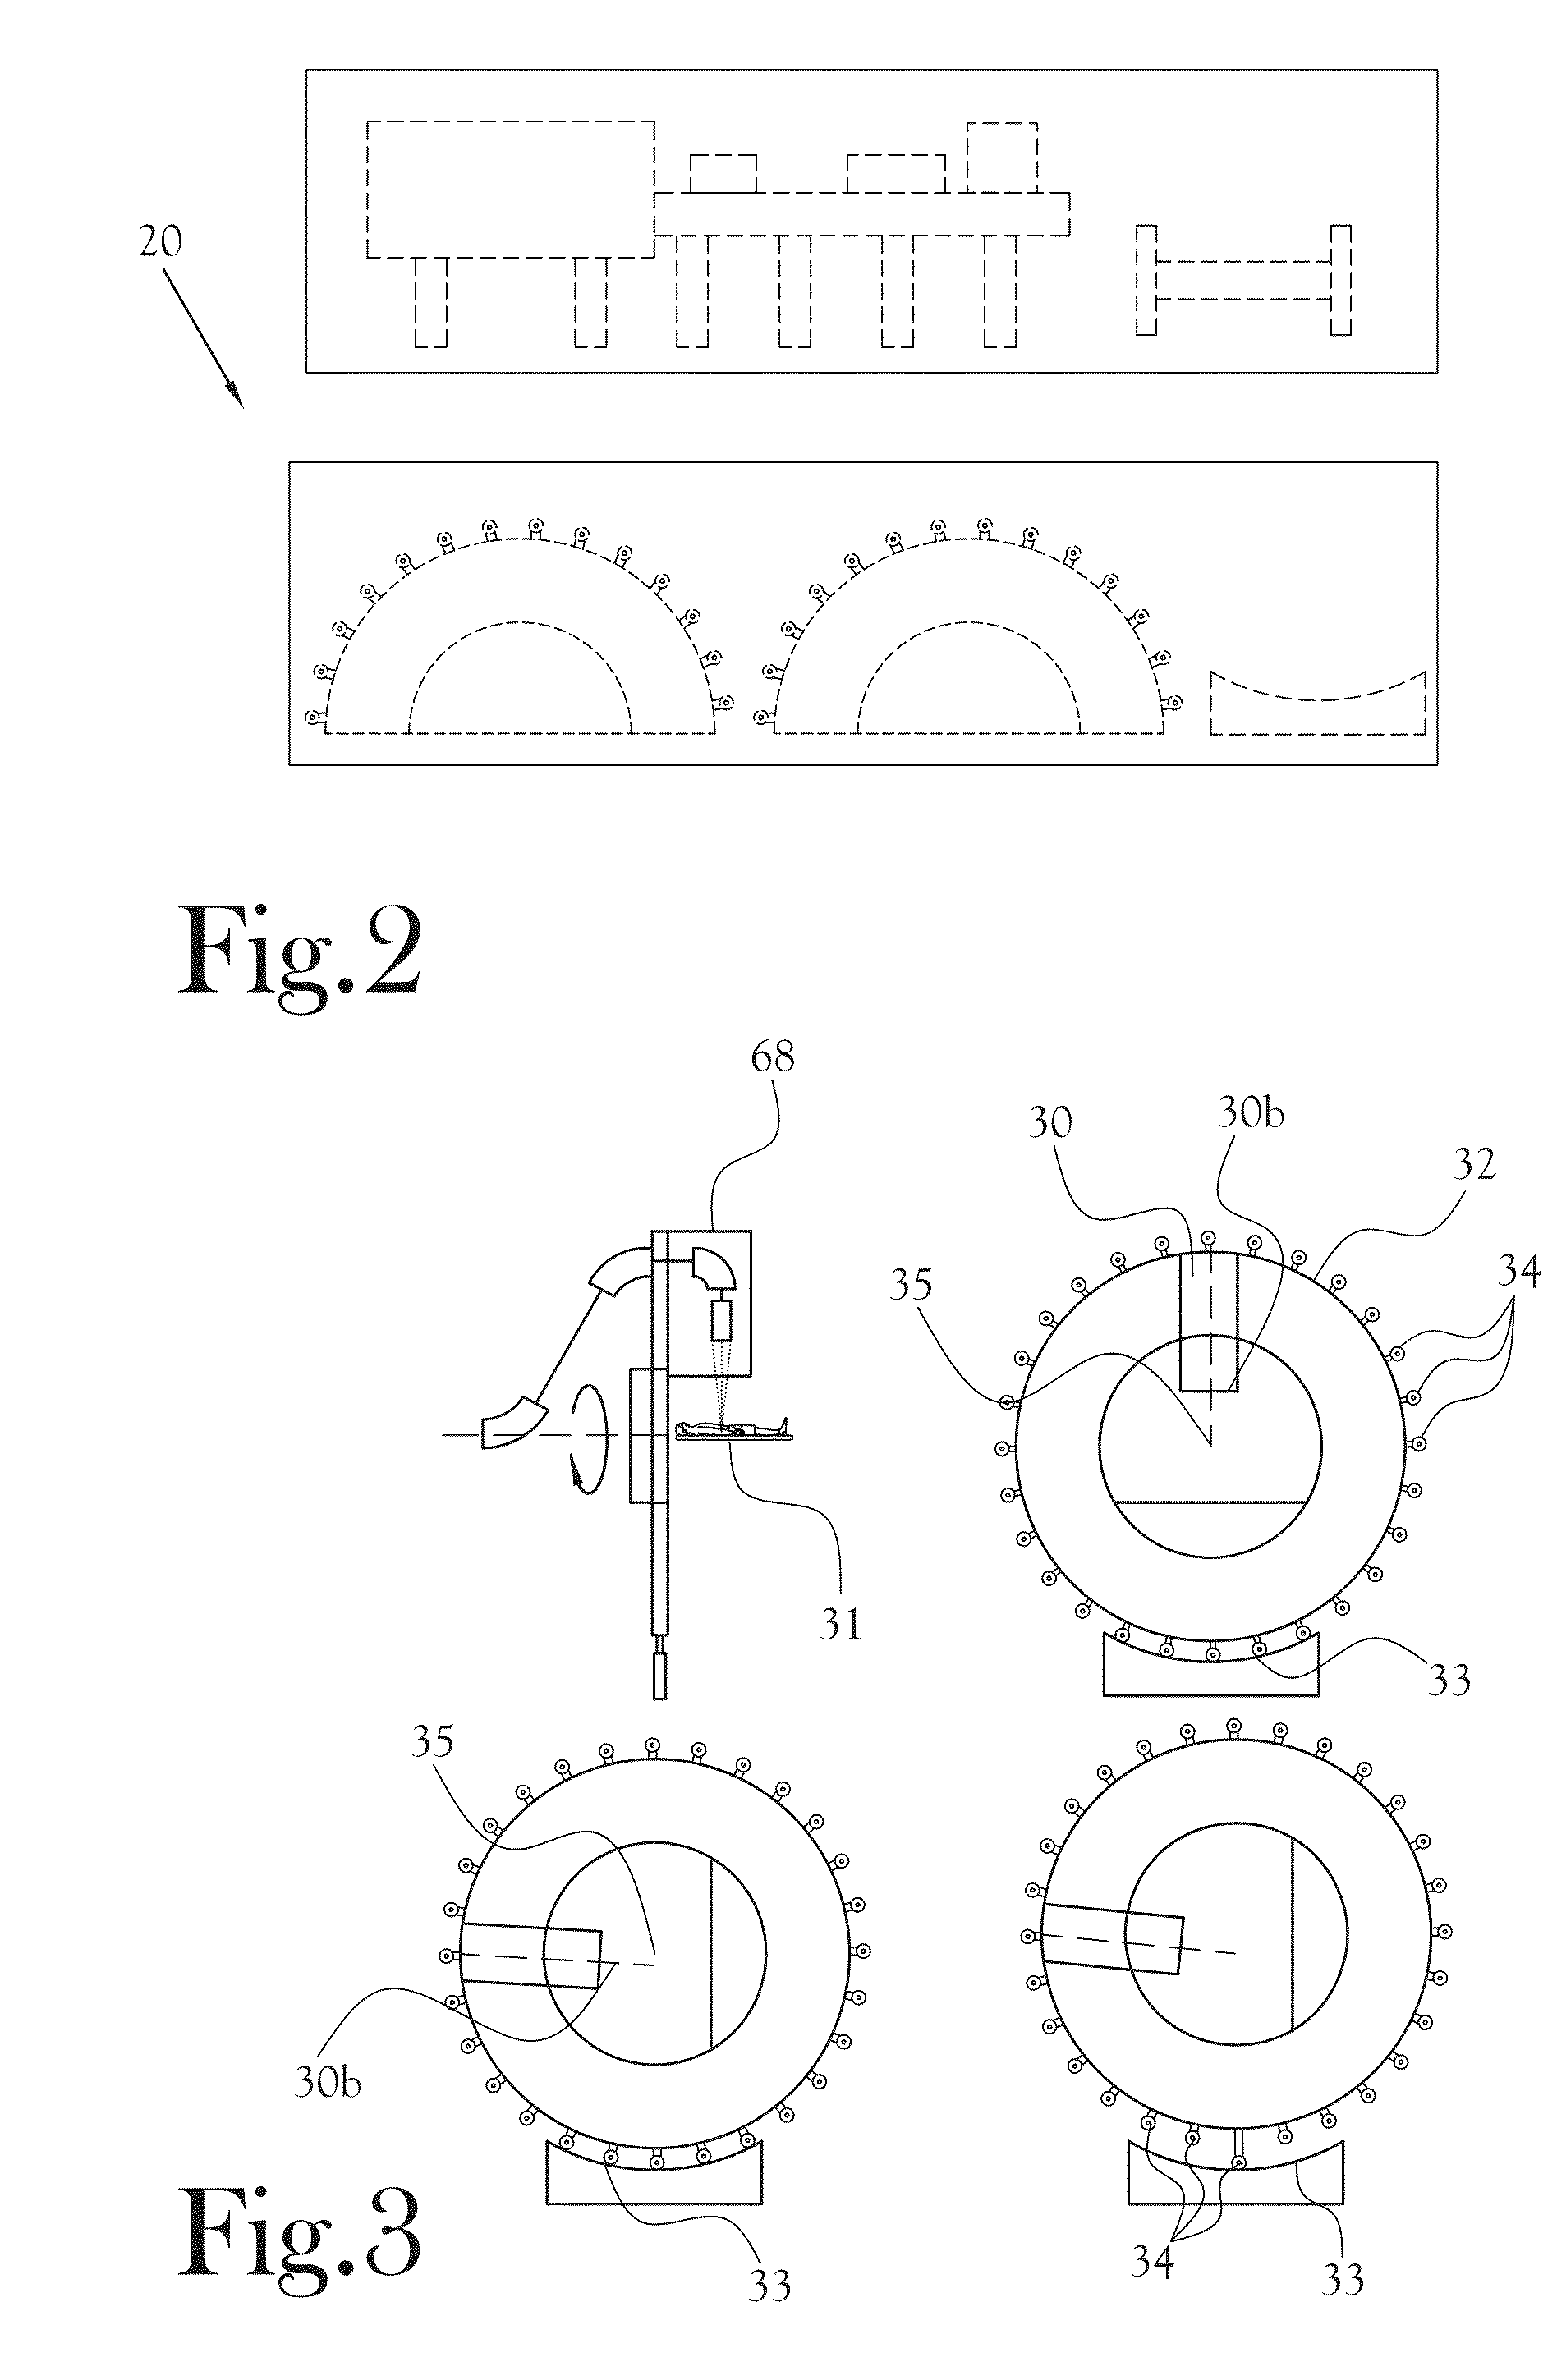 Systems and methods of adjusting a rotating gantry system